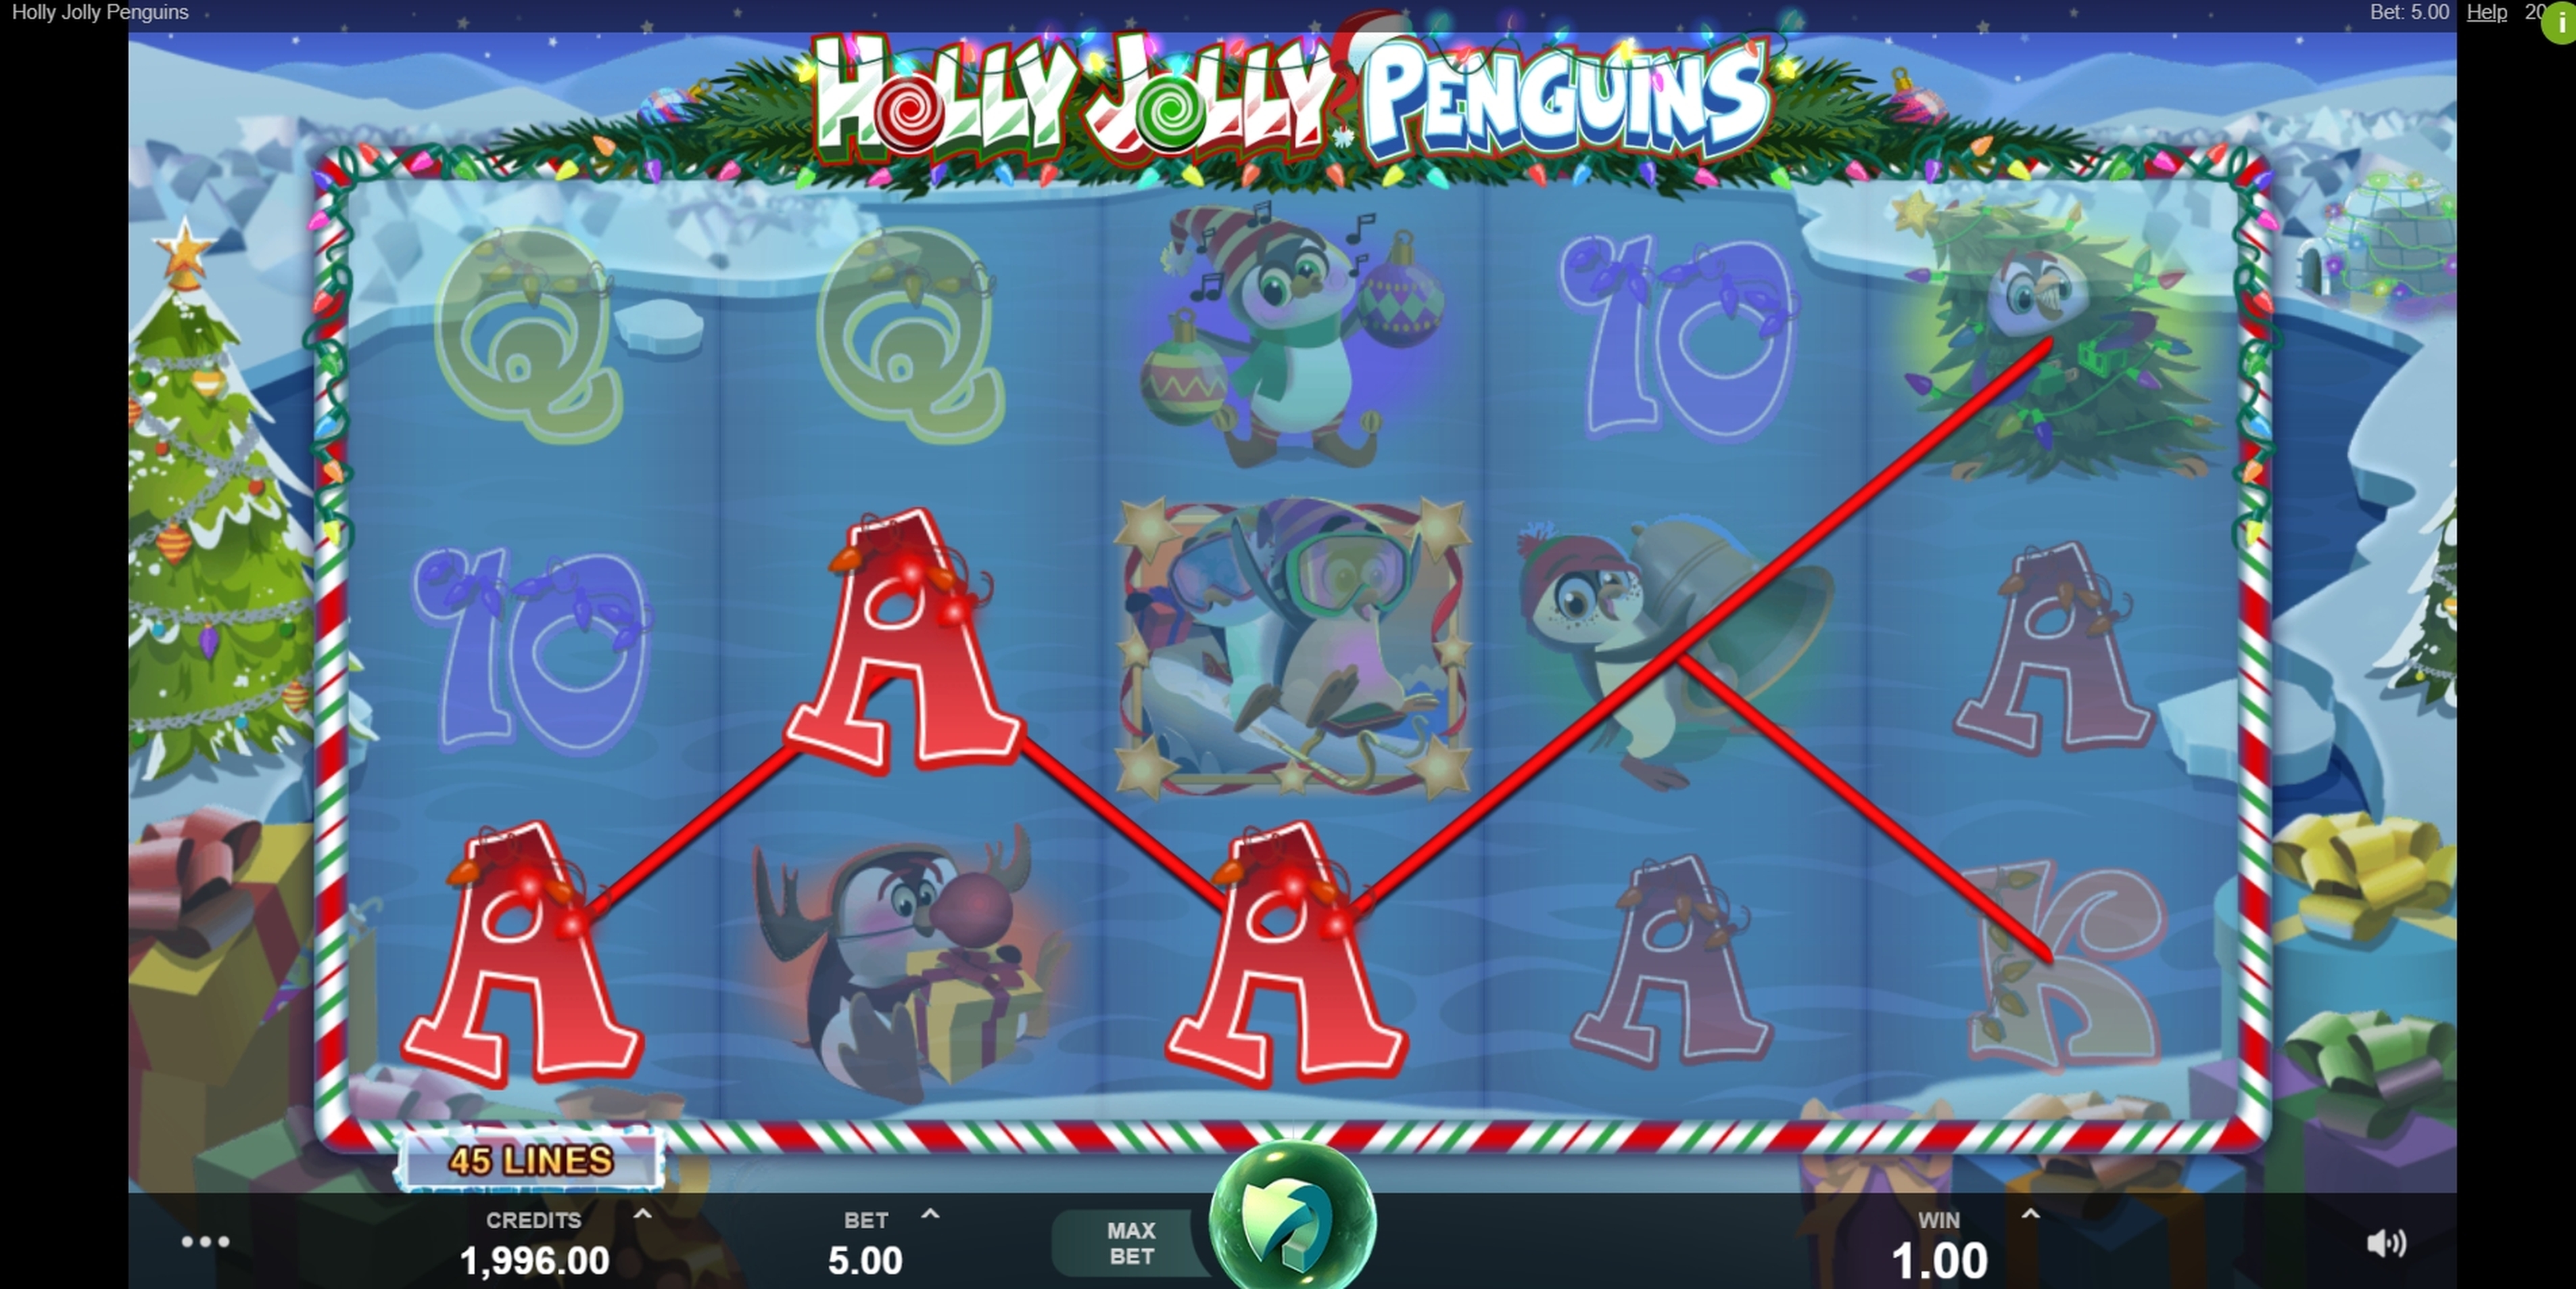 Win Money in Holly Jolly Penguins Free Slot Game by Fortune Factory Studios